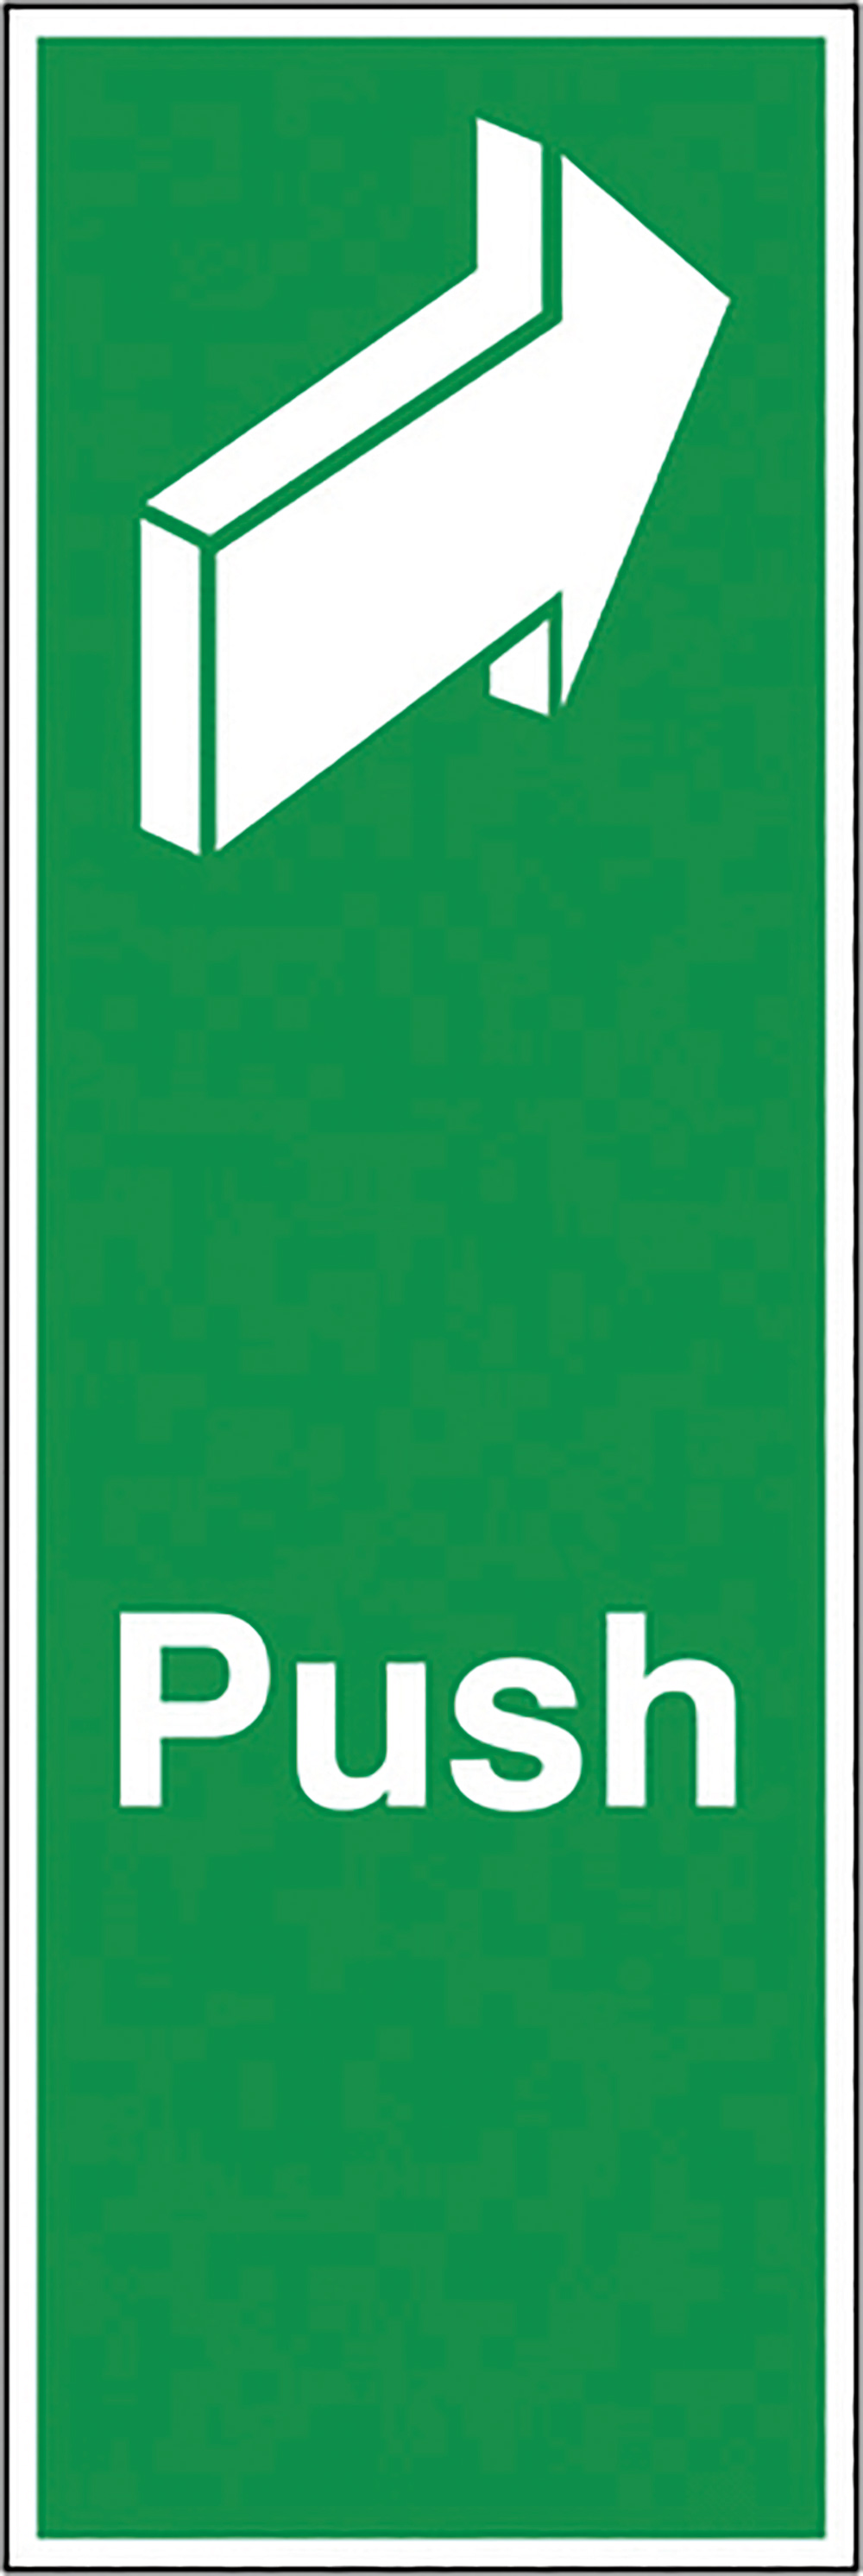 Push 150x50mm Upright Safety Sign